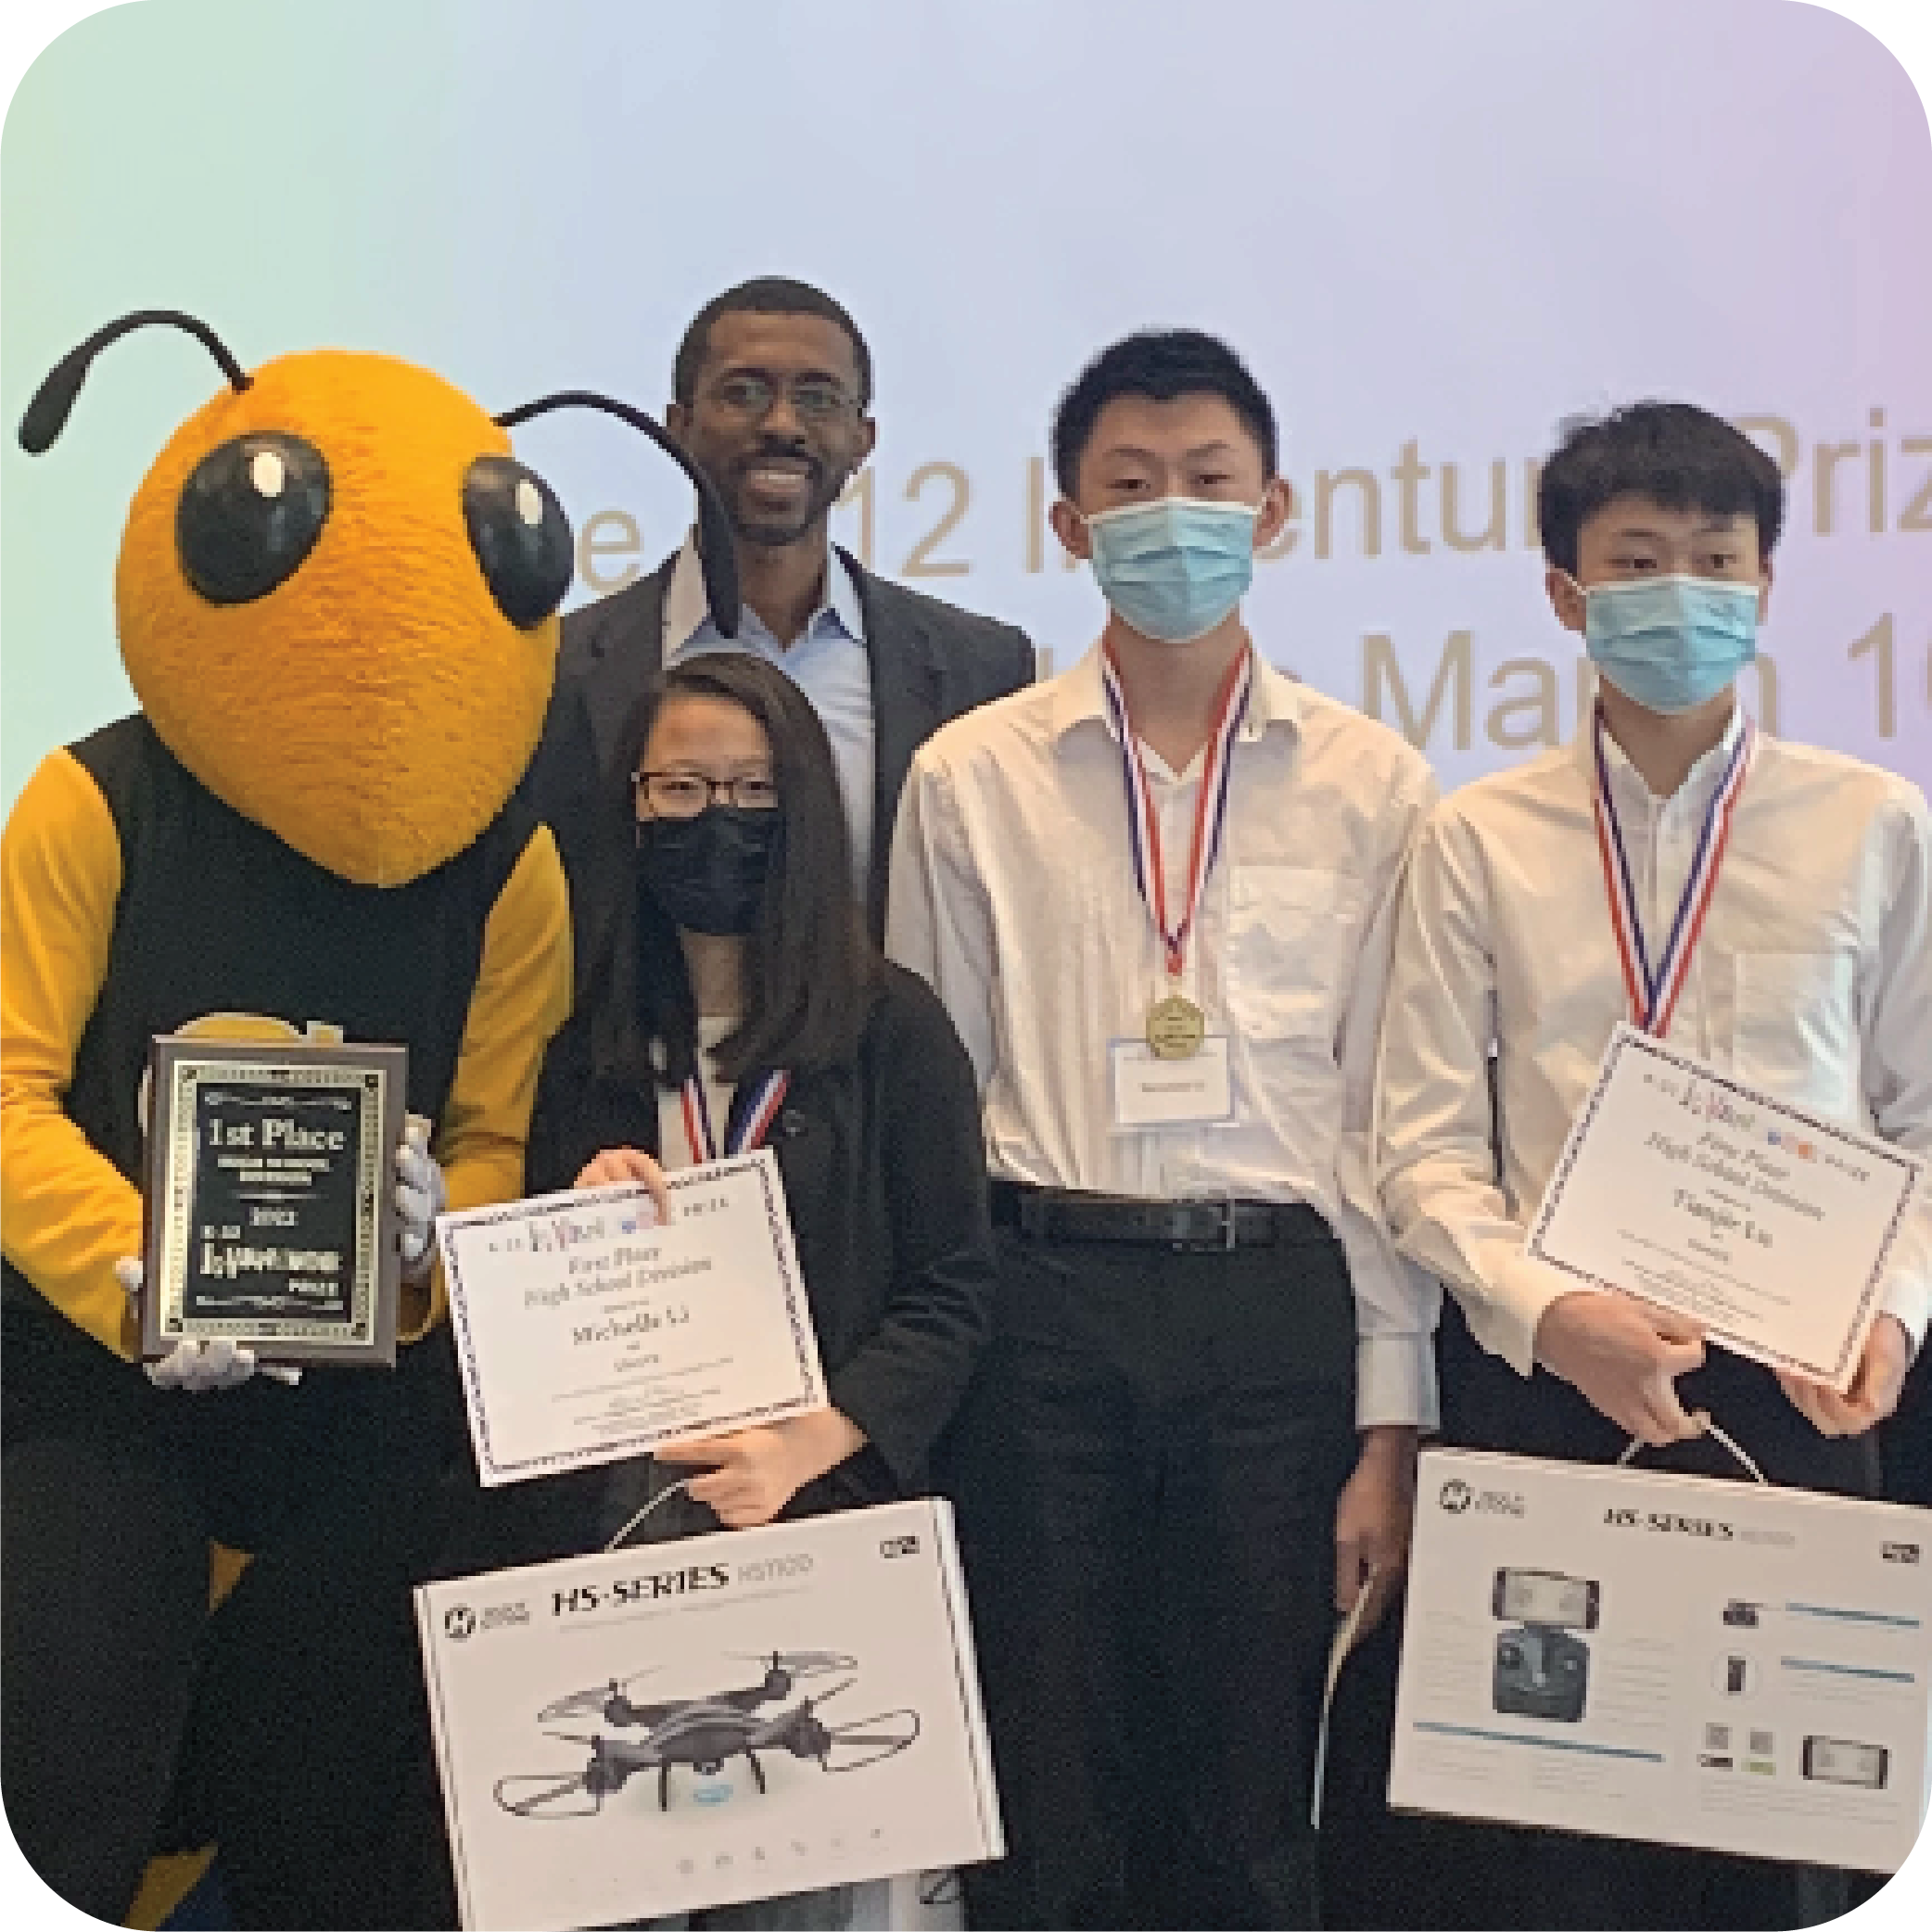 Three smiling students holding prizes and standing next to Buzz (Georgia Tech's yellowjacket mascot) holding a plaque and Craig Cupid (Georgia Intellectual Property and Alliance representative).